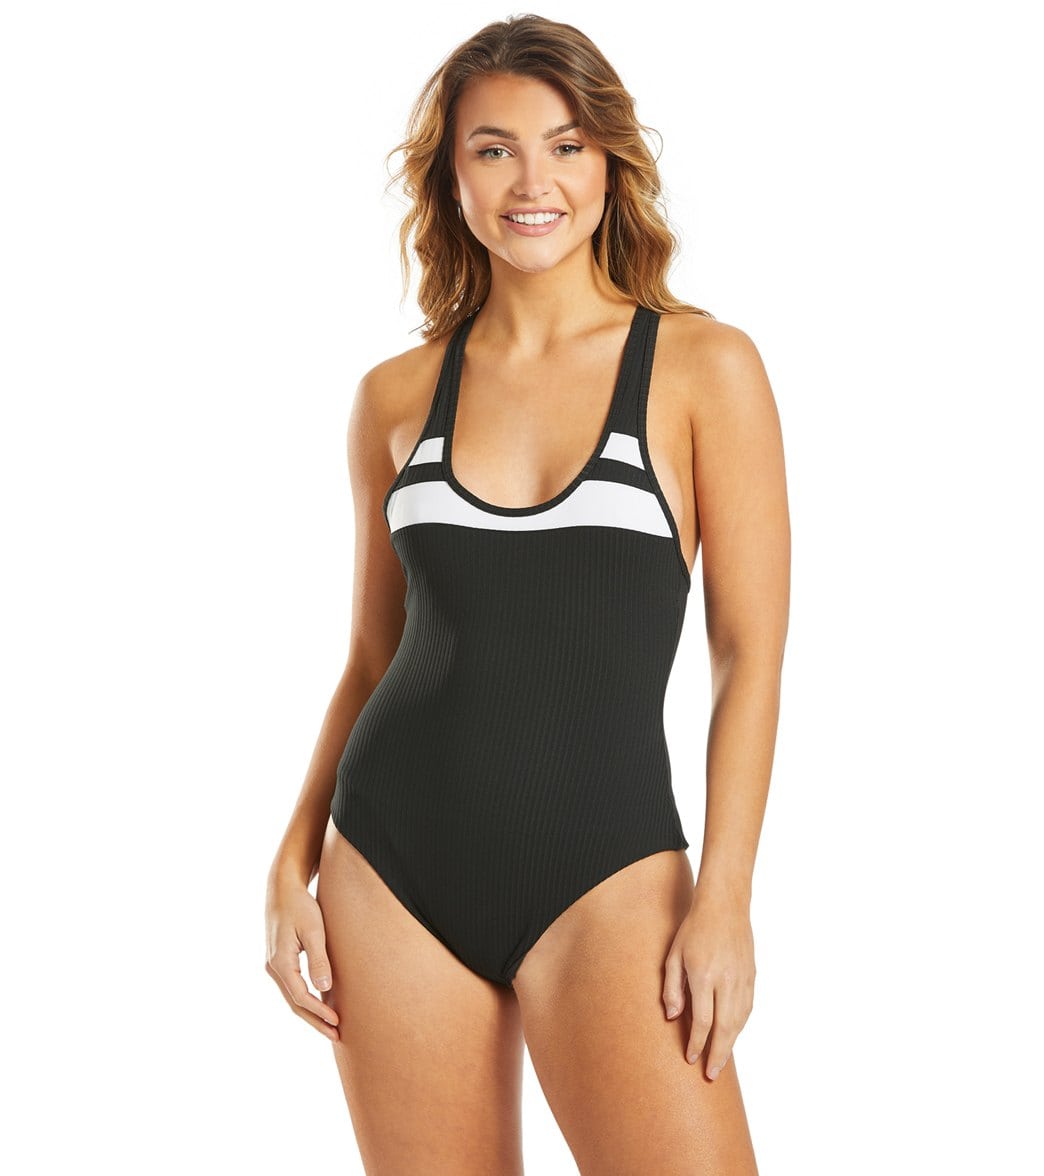 Hurley Block Party One Piece Swimsuit